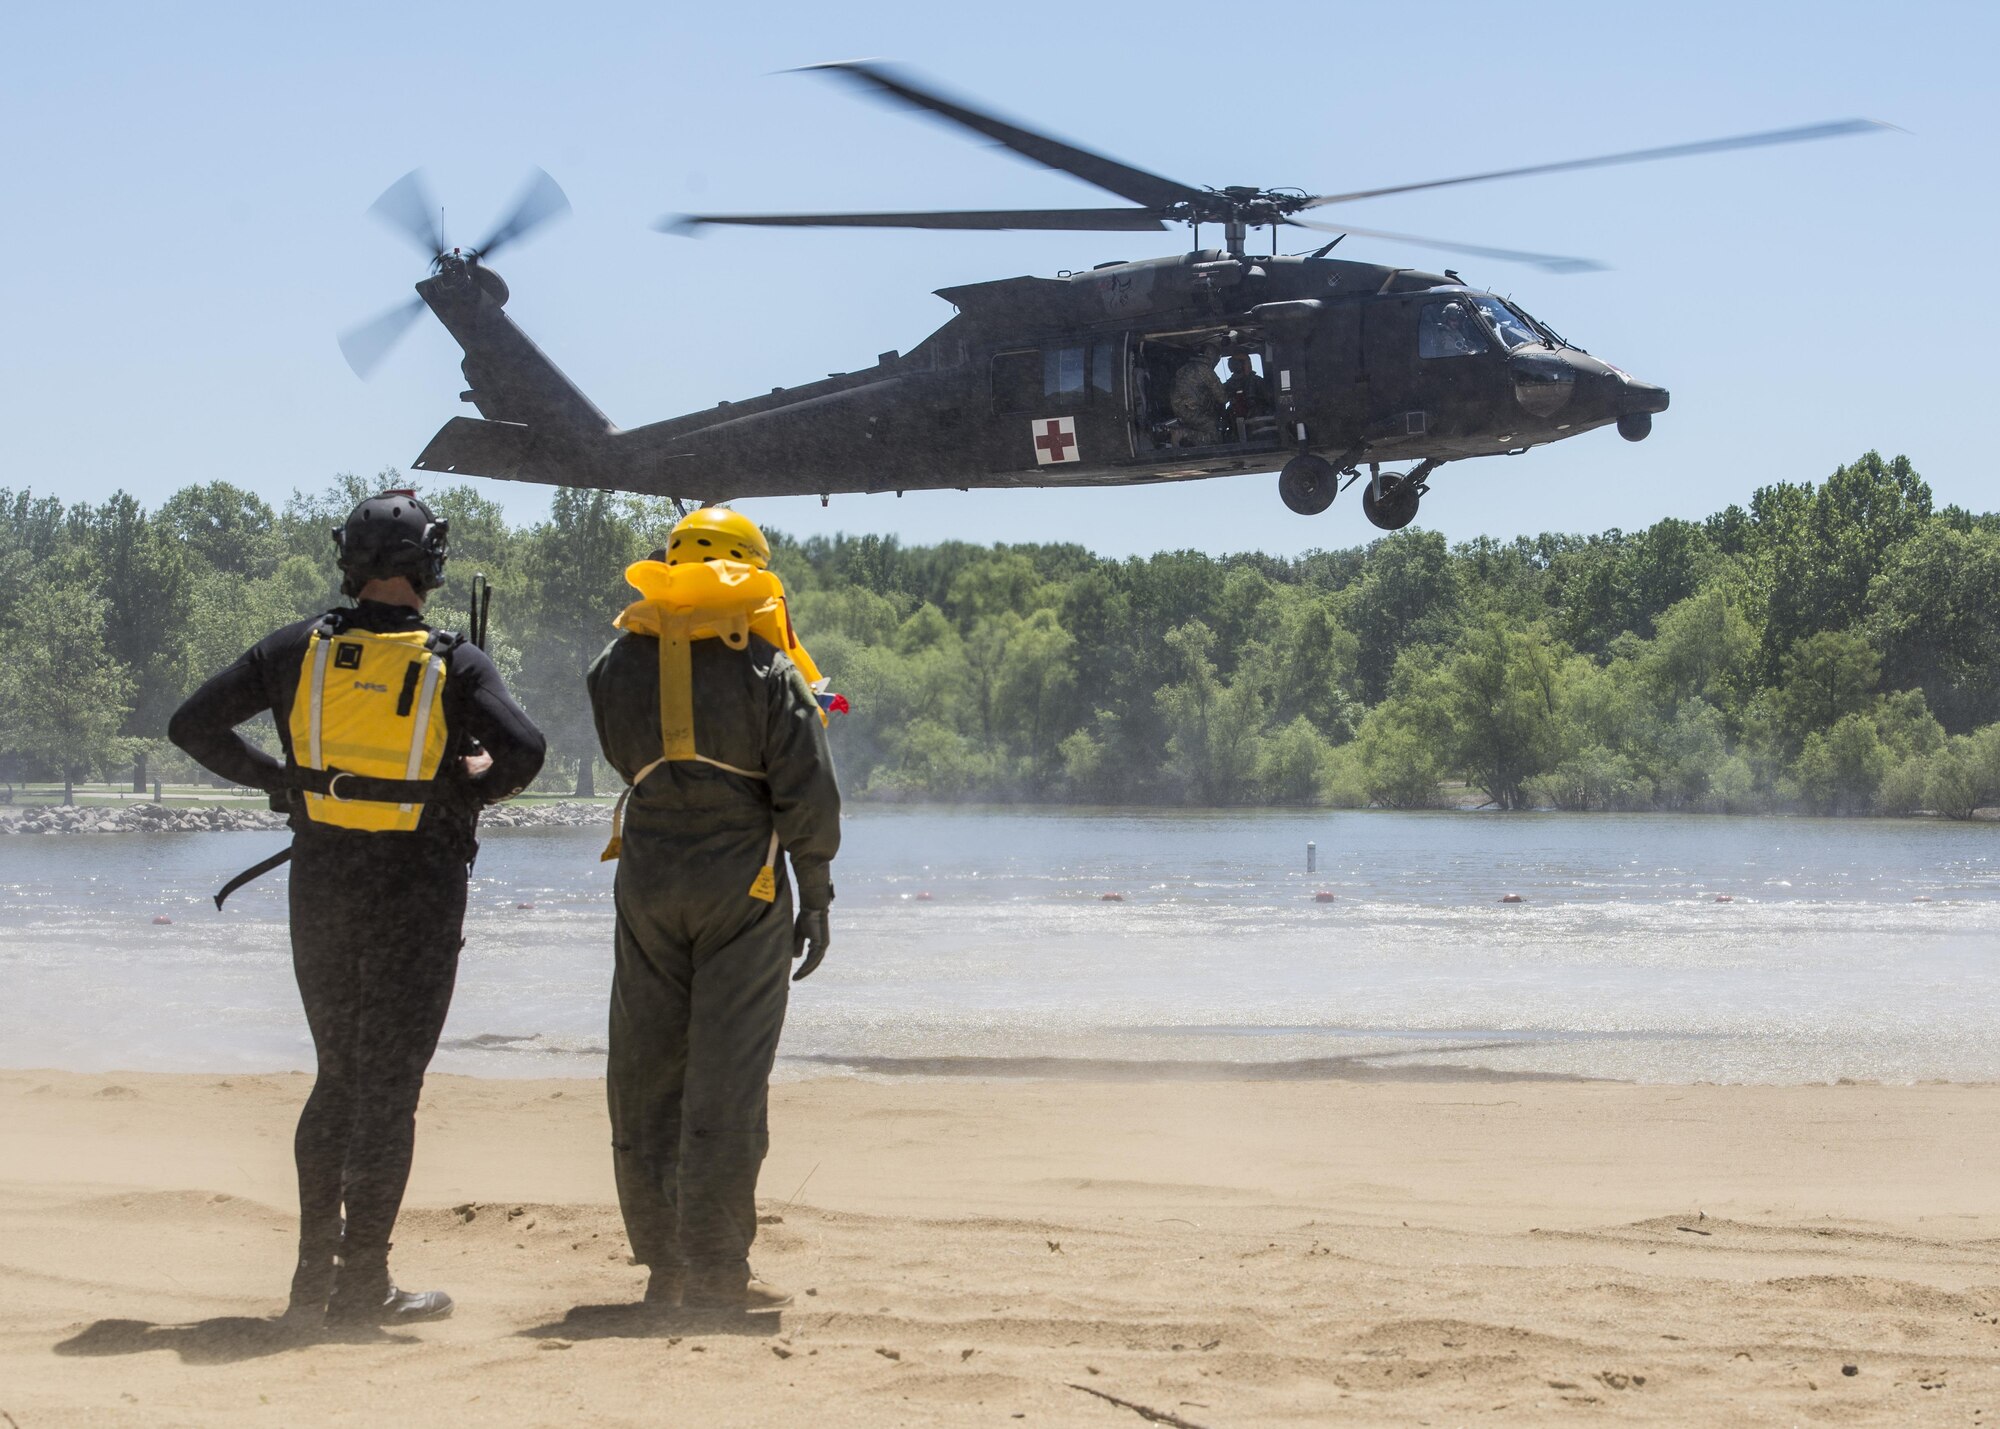 A Survive, Evade, Resist and Escape instructor and Lt. Col. Brandon Dow, 54th Airlift Squadron from Scott Air Force Base,  prepare for their first ever medical evacuation water extraction with the 6-101st Aviation Regiment from Fort Campell, Kentucky at Lake Carlyle, Illinois, June 7, 2017. Dow, Lt. Col. Brooke Matson, 375th Operations Support Squadron, and Maj. Madison Basil Jr., Air Mobility Command, received hoist, water survival and flare training to learn how to survive in aqautic situations long enough to be rescued. The 101st Combat Aviation Brigade has served in almost every single military operation since the Vietnam War, including combat, peacekeeping, and humanitarian. By partnering with AMC's SERE instructors, this training allows for joint-service coordination while preparing aerial crew members to survive in austere locations ater being displaced from their aircraft. (U.S.Air Force photo by Airman 1st Class Daniel Garcia)